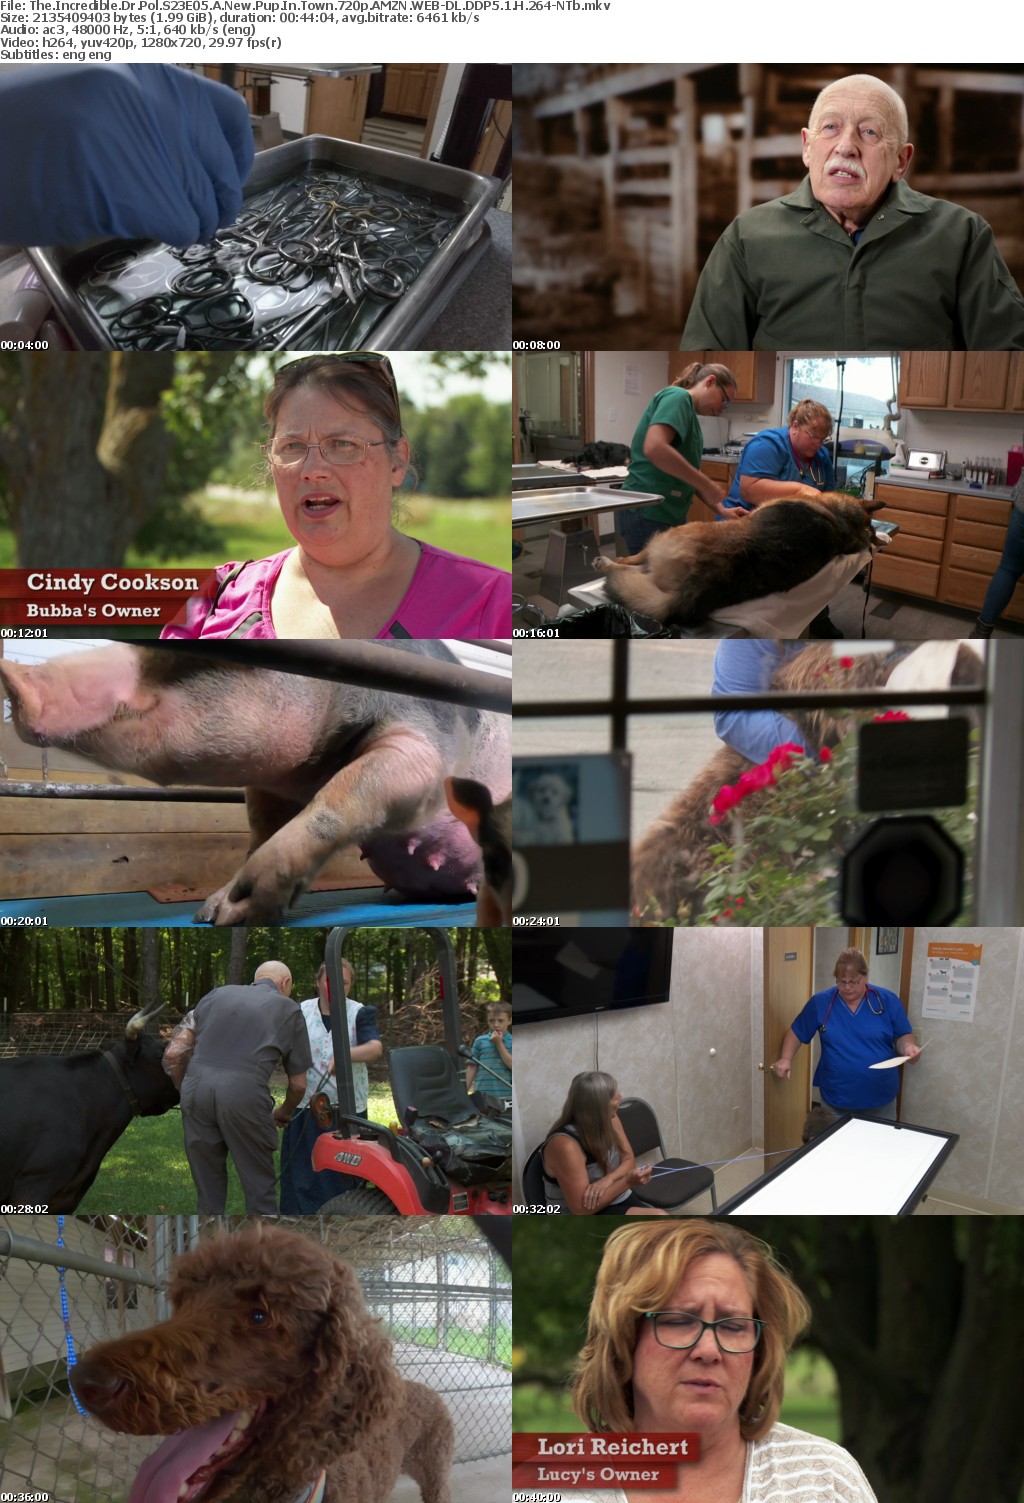 The Incredible Dr Pol S23E05 A New Pup In Town 720p AMZN WEB-DL DDP5 1 H 264-NTb